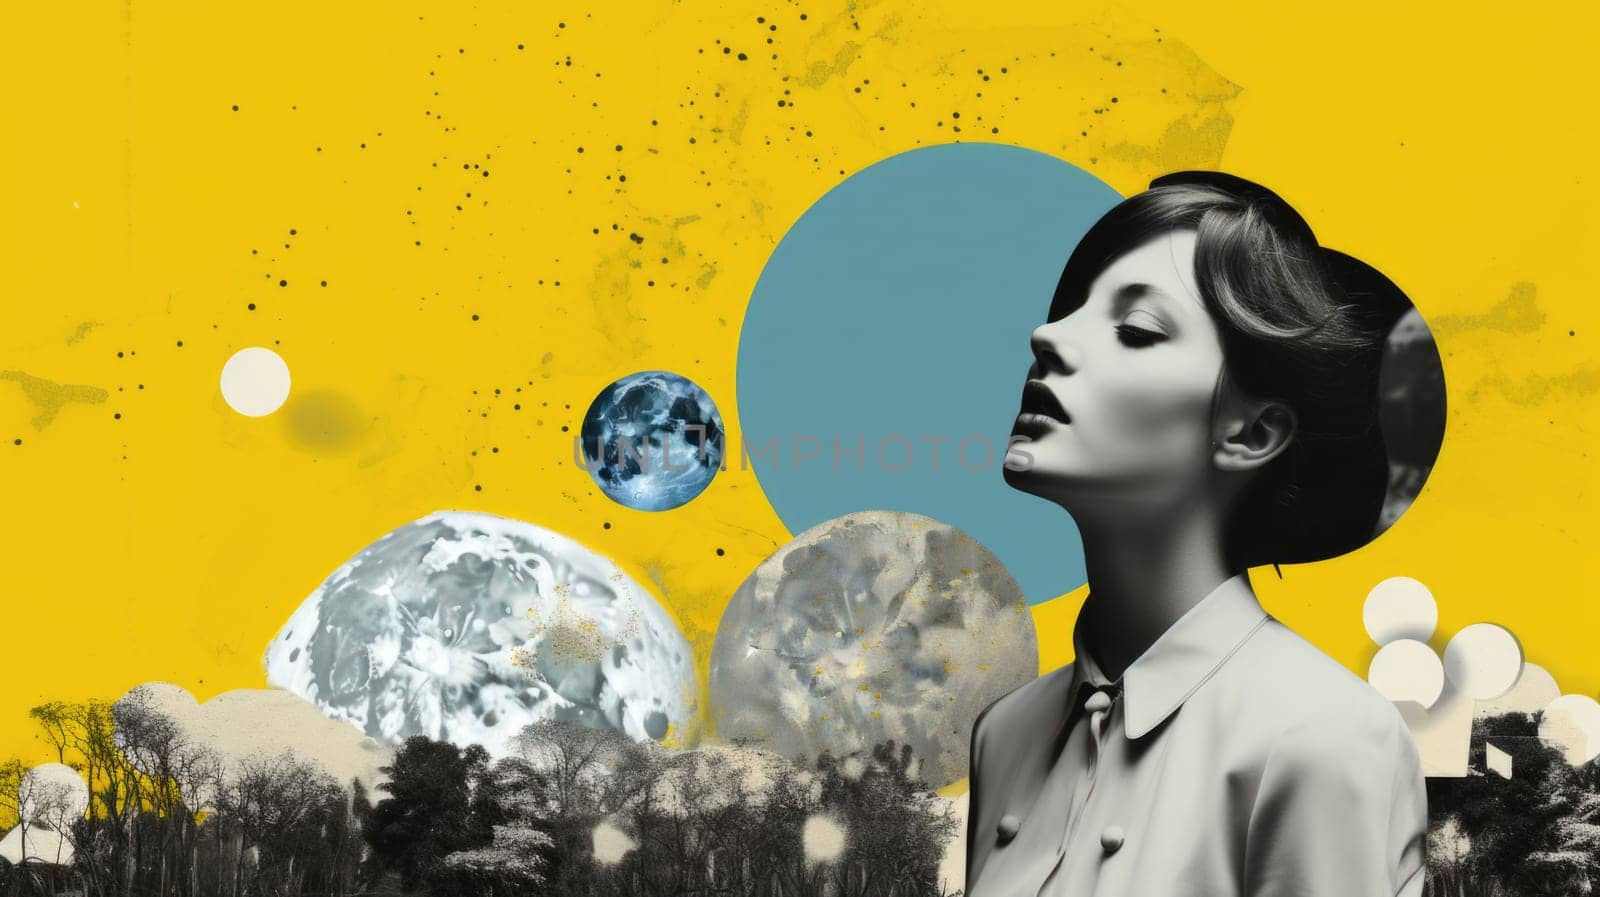 Art collage halftone woman portrait on nature background. Moon and planets on yellow sky, grass and geometric shapes, grunge texture